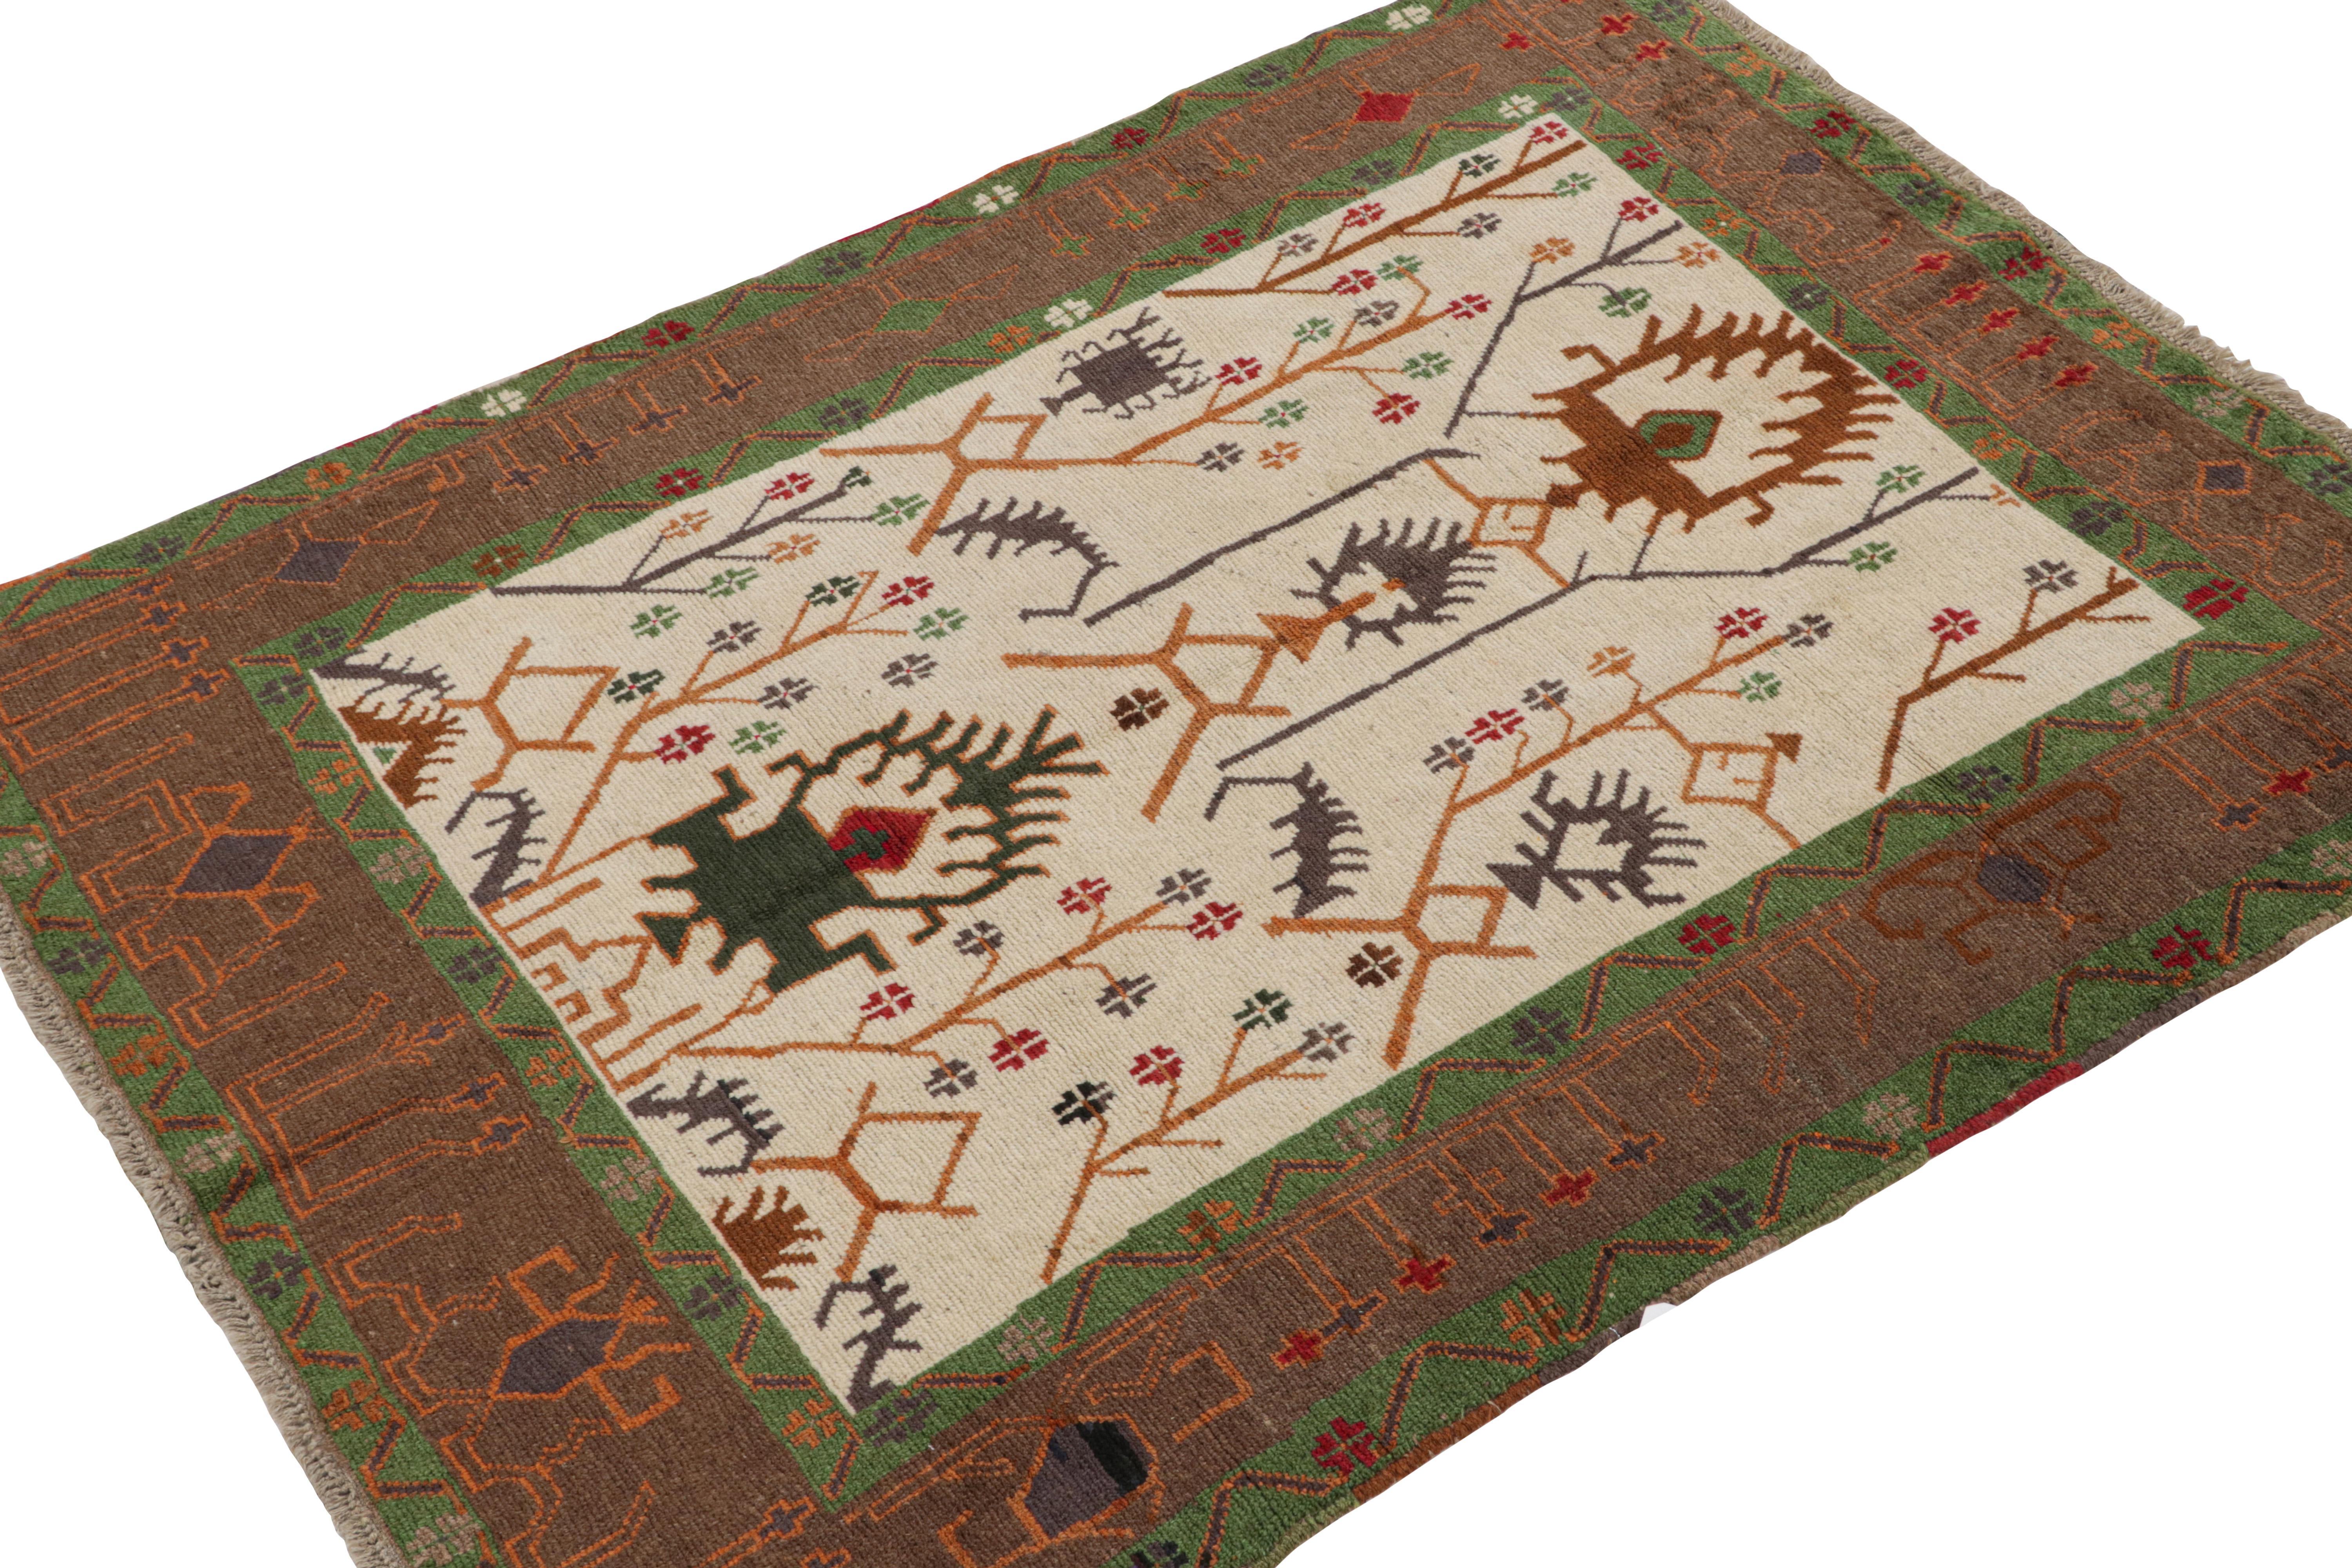 Inspired by Oushak tribal rugs, this 5x6 rug is the latest to join Rug & Kilim’s Modern Classics collection. 

Hand-knotted in wool, its design represents a playful take on this style—particularly the more vibrant green and orange tones in the